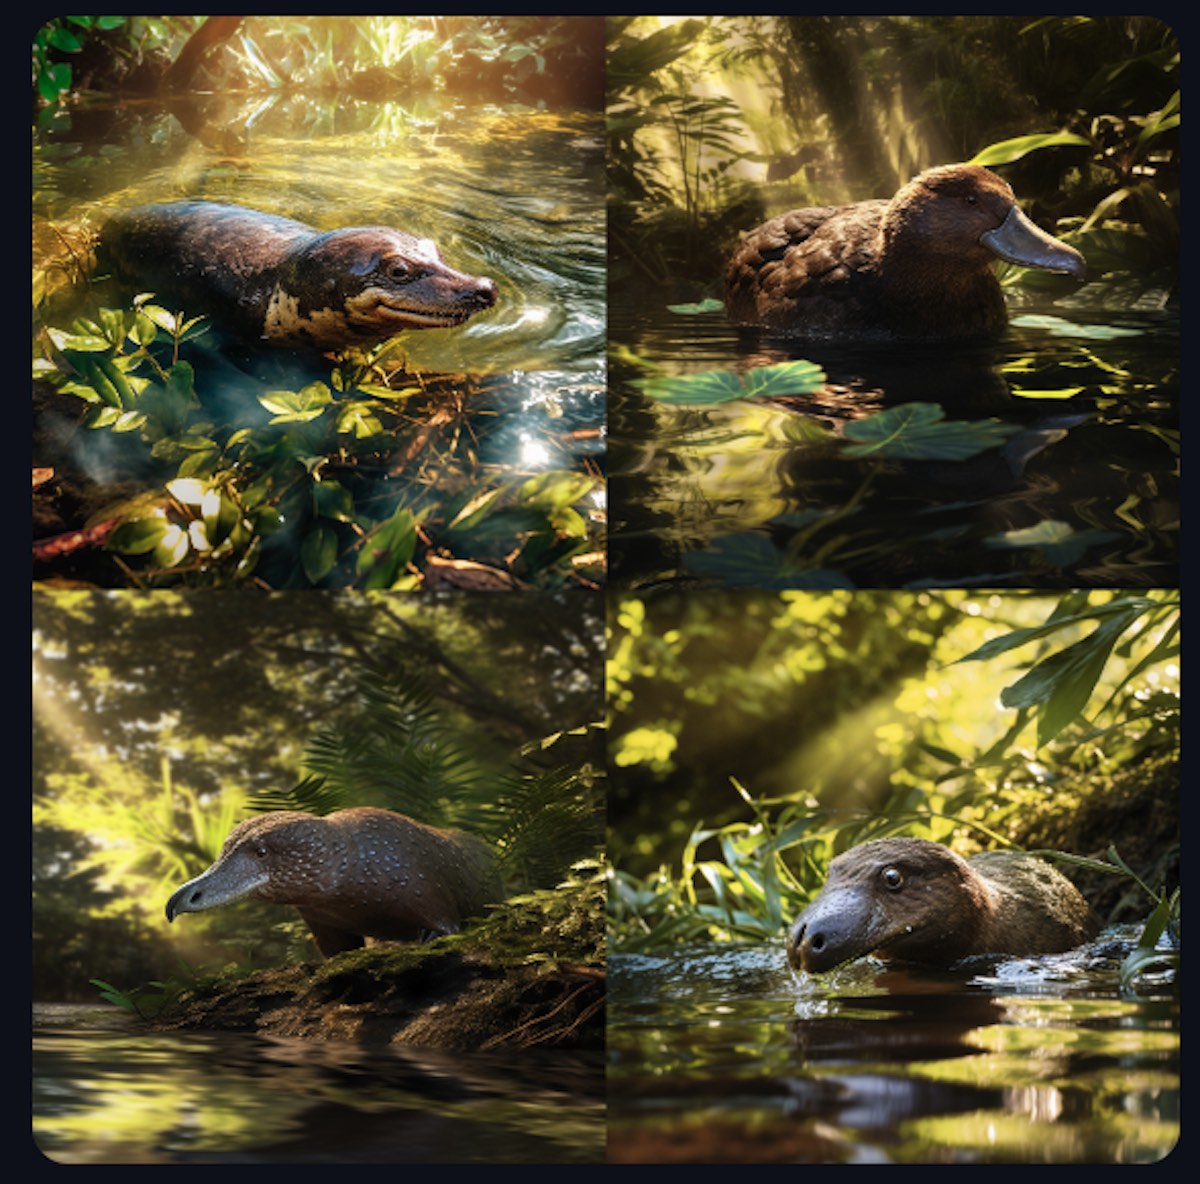 L'ornitorinco secondo Midjourney. Il prompt originale per farlo creare era: «Generate an image of an adult platypus( Ornithorhynchus anatinus) in its natural habitat. The creature is positioned half in, half out of a clear, gurgling stream, surrounded by lush Australian bush vegetation. The sunlight filters through the overhead foliage, casting dappled shadows on its wet, dark - brown, waterproof fur. The platypus is mid - motion, with droplets of water falling from its body as it emerges from the stream. The streamlined body is about 50 centimeters long, somewhat resembling a compact, chunky otter. It has a distinct, flat tail, similar to that of a beaver, serving as a fat reservoir, that appears sleek and is partly submerged in the clear water. The creature's most striking feature, the duck - billed snout, is clearly visible. It's a flexible, rubbery, and sensitive organ, a shade darker than the body, which it uses to detect its prey underwater. Its eyes are small, round, and alert, with a spark of inquisitive intelligence. They are closed, protecting it from the water. No external ears are visible, hidden behind the fur, but the platypus is still capable of sensing sounds around it. Webbed, clawed feet paddle at the water's surface, showing off their full expansion. When on land, the webbing retracts, exposing more of the claws which help in digging burrows. Lastly, just visible beneath the water surface, is the male platypus's infamous spur on the hind limb, a sharp point that can deliver a venomous sting, a rare trait among mammals. This image encapsulates the unique features and mysterious charm of the platypus, truly one of nature's most interesting creations».